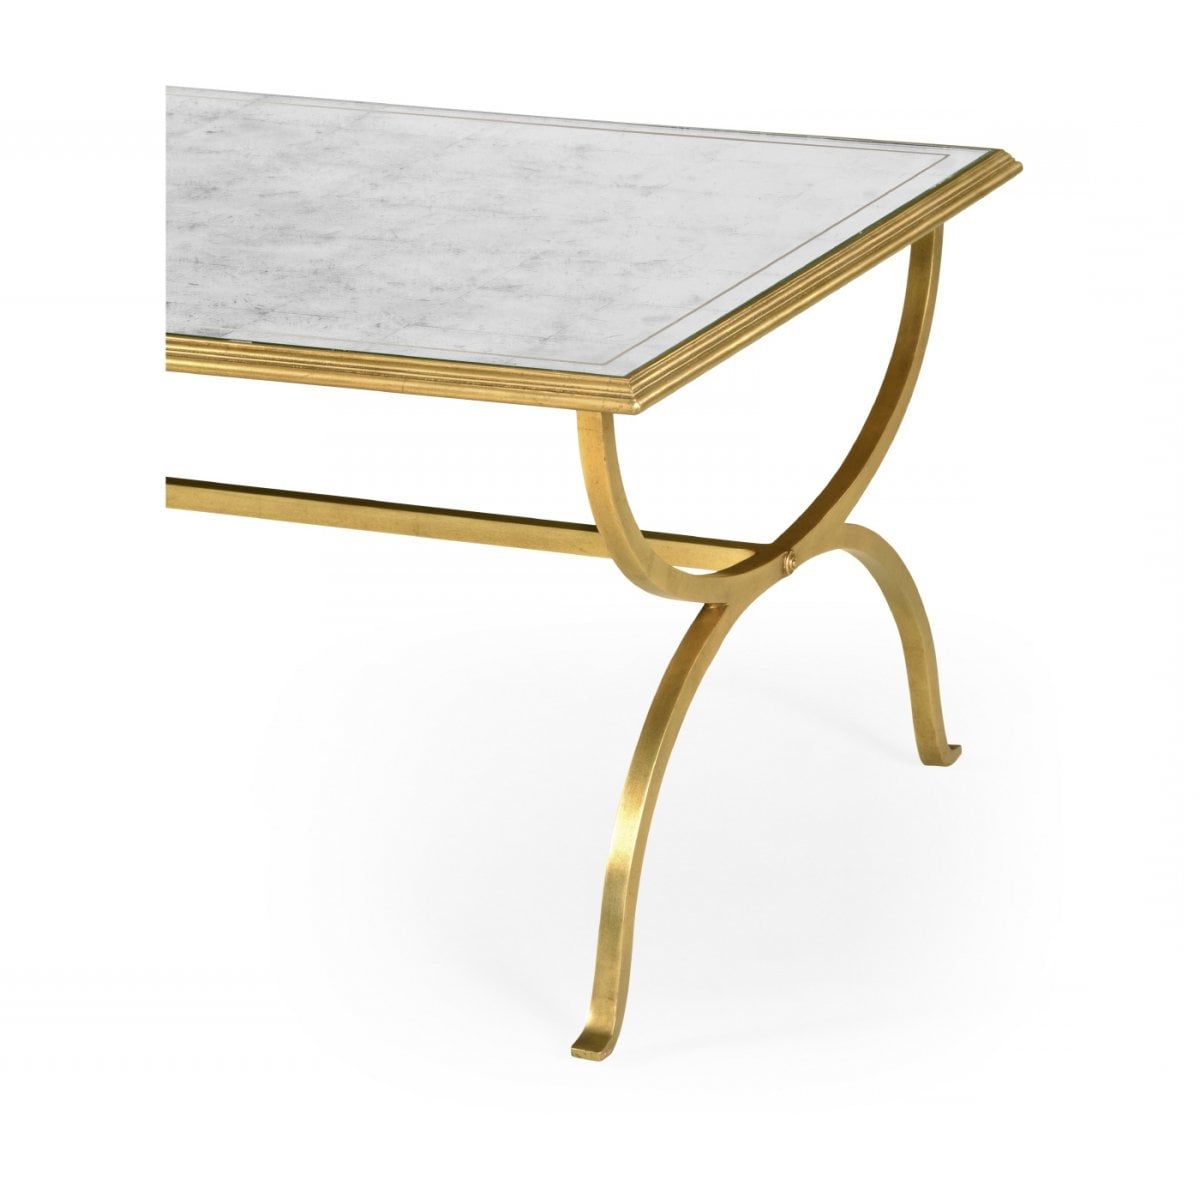 Favorite Rectangular Glass Top Coffee Tables With Rectangular Gold Coffee Table With Glass Top (View 2 of 20)